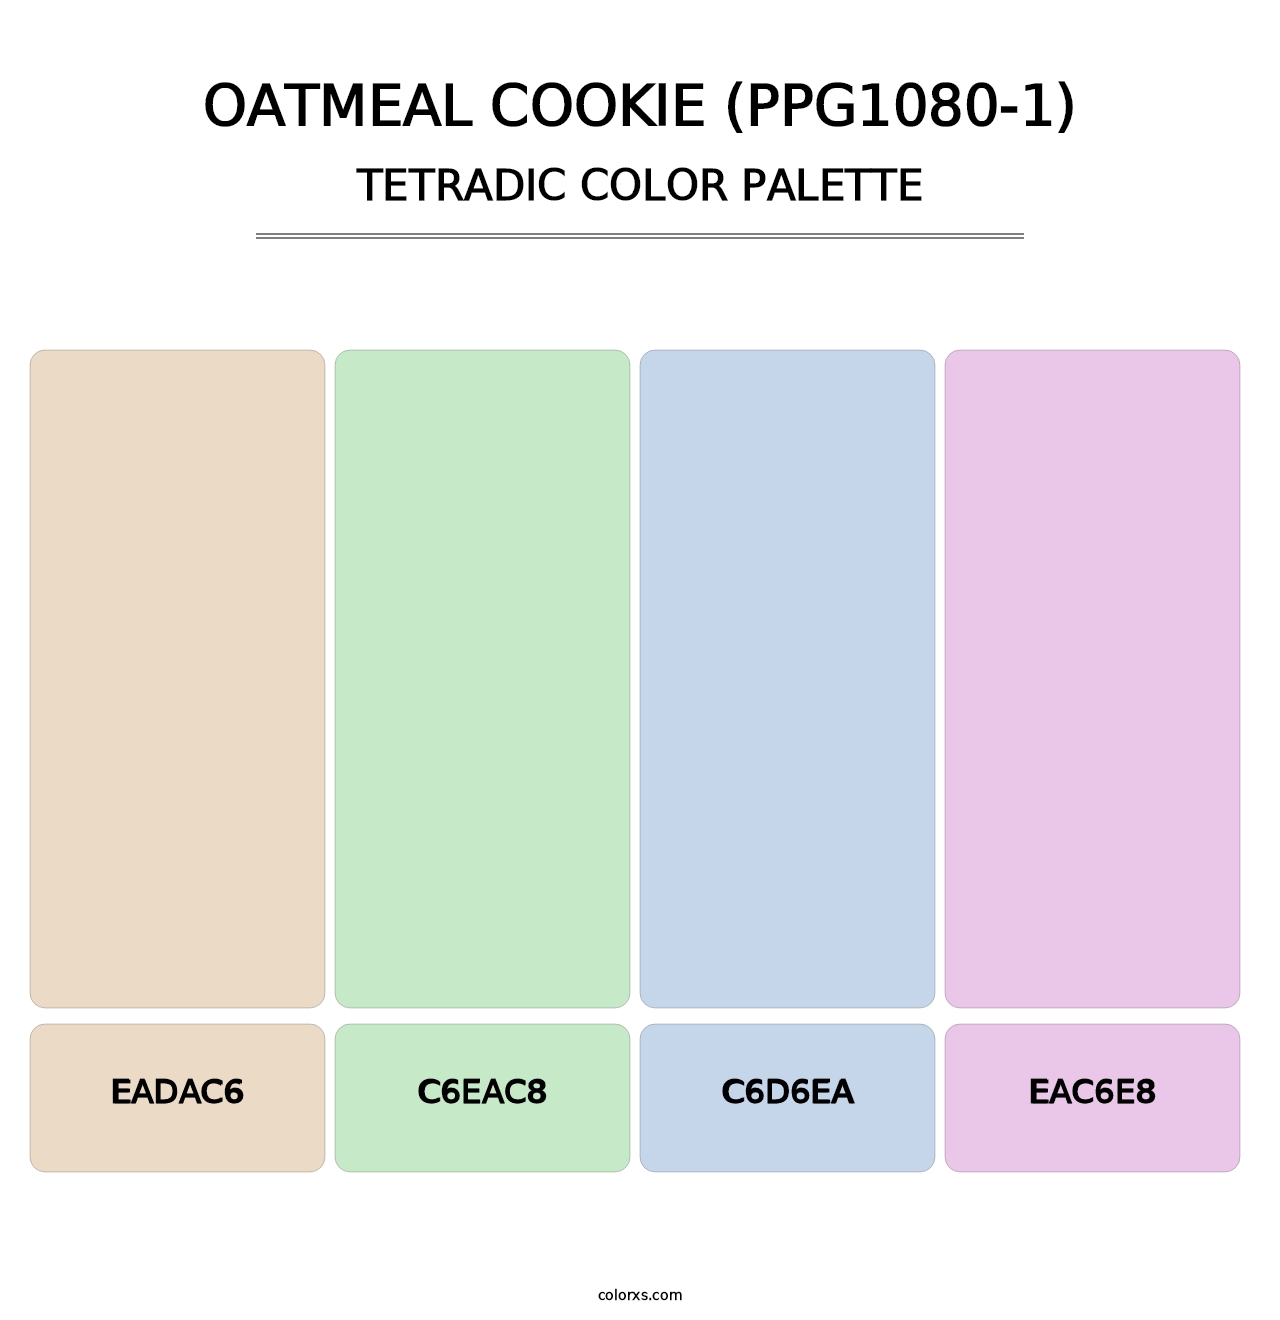 Oatmeal Cookie (PPG1080-1) - Tetradic Color Palette